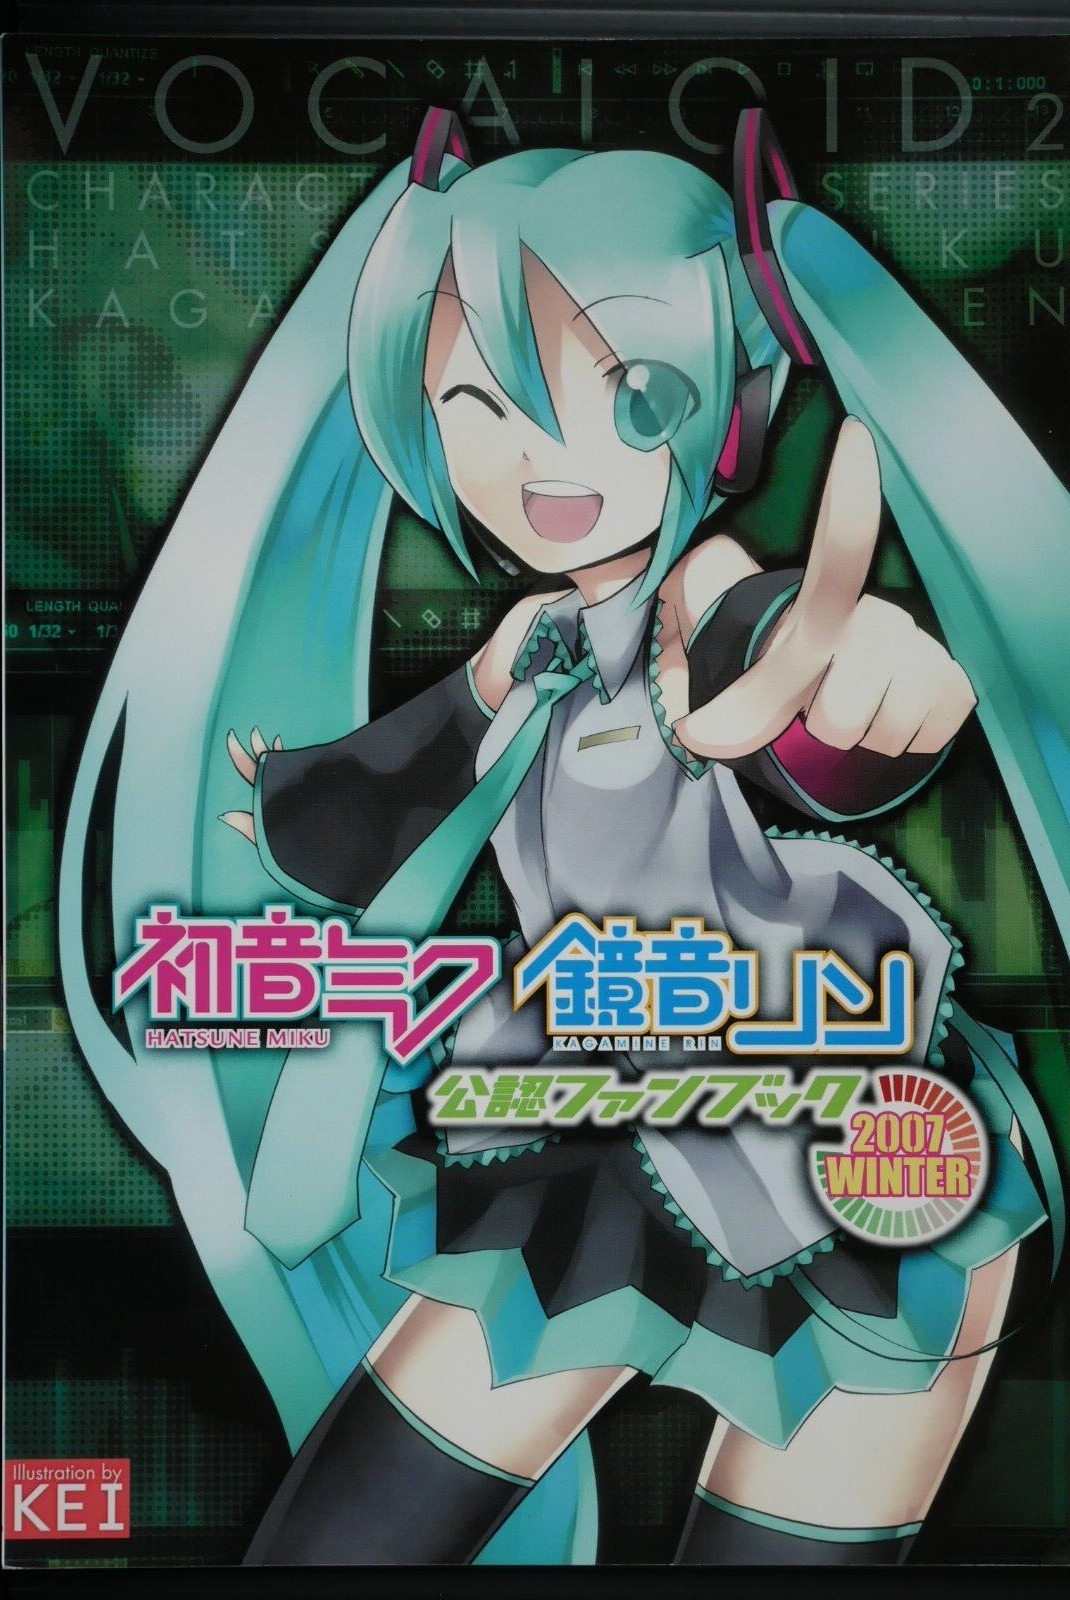 Vocaloid: Hatsune Miku / Kagamine Rin Official Fan Book 2007 Winter - from JAPAN